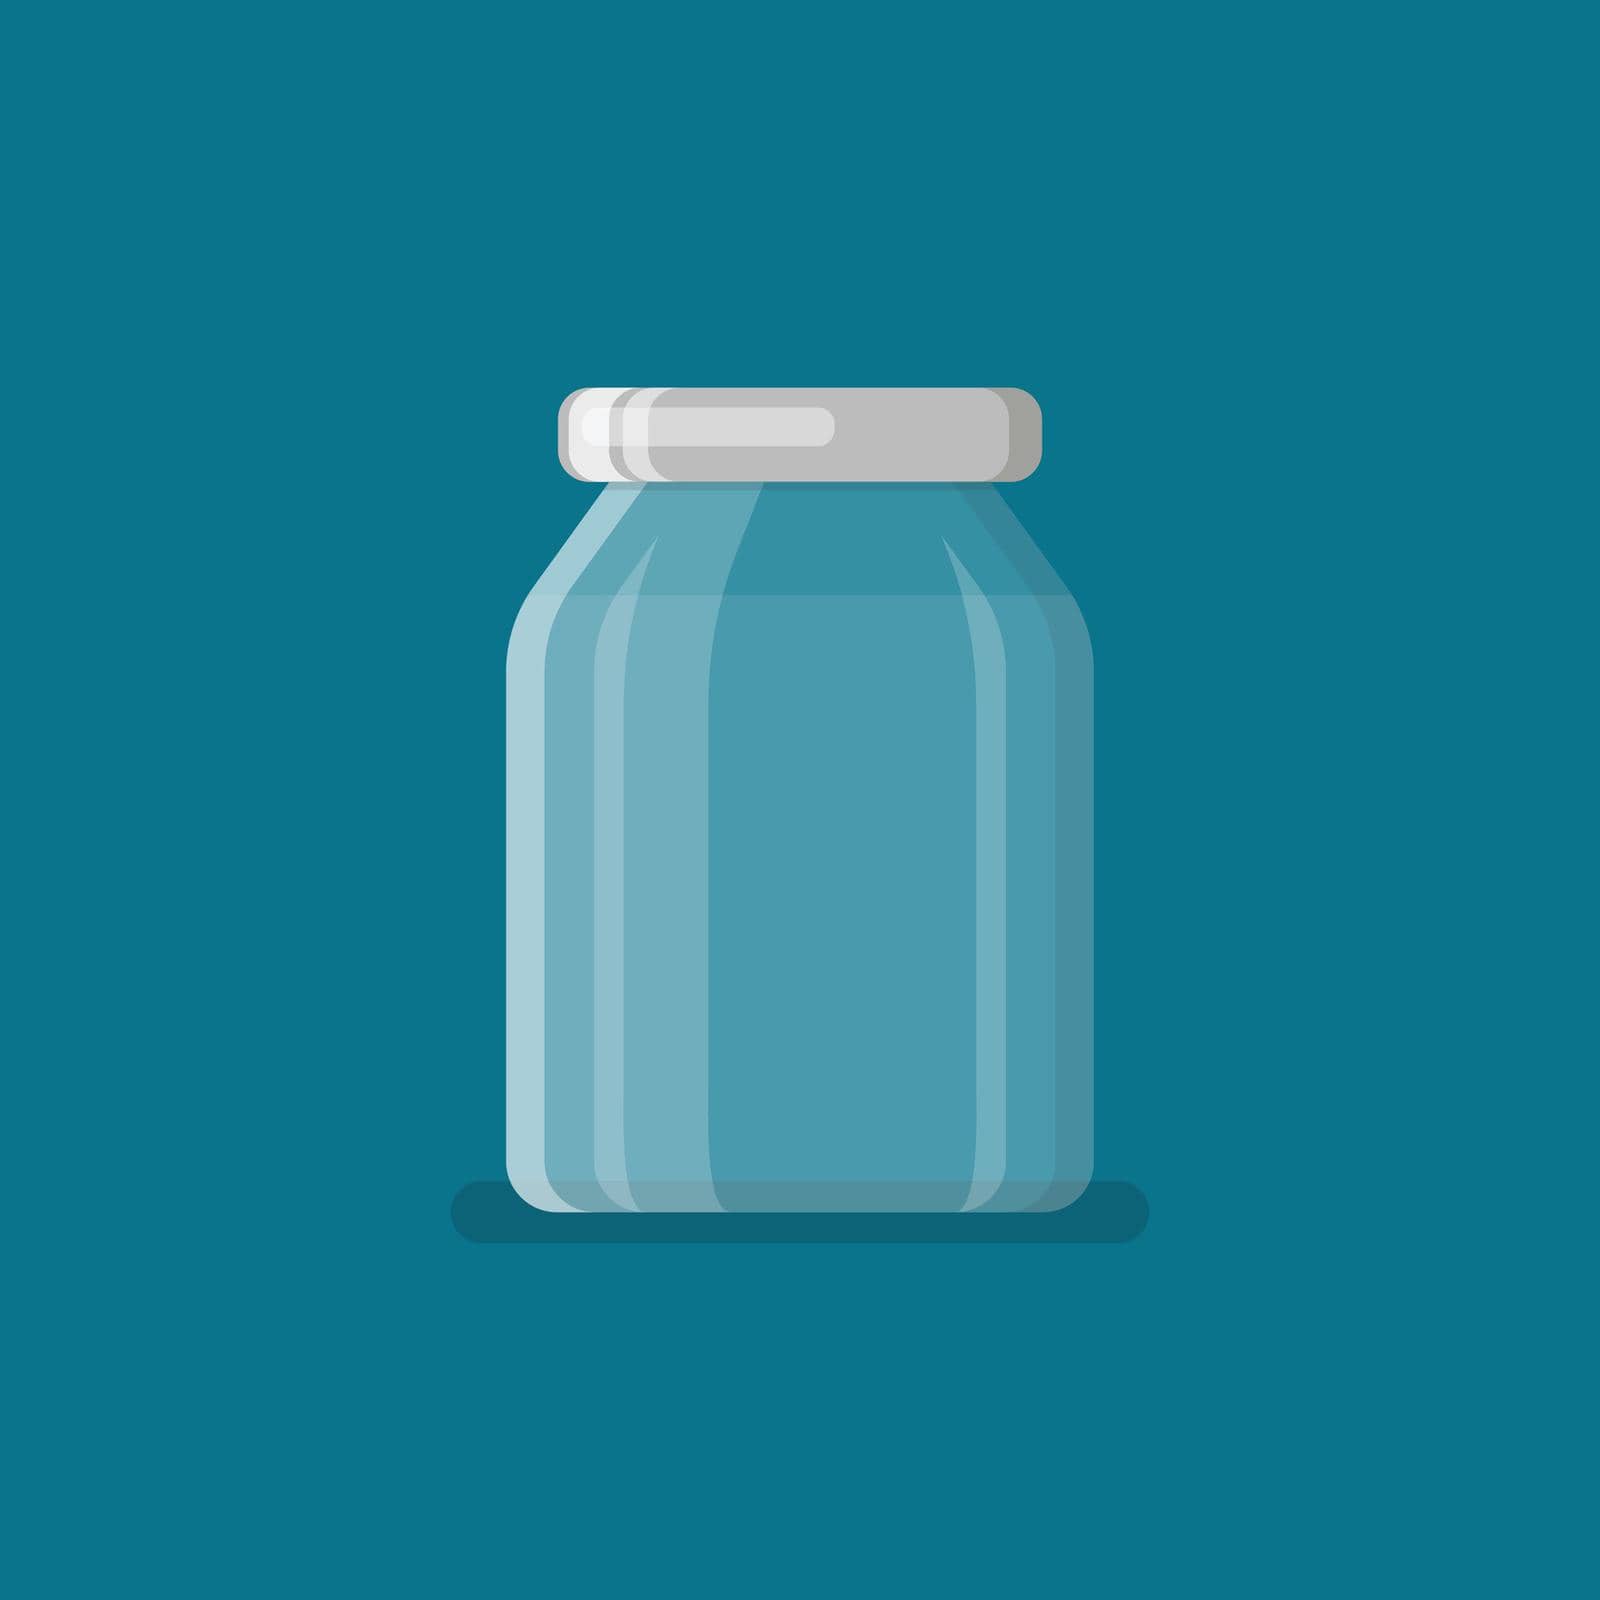 Jar in flat style by siraanamwong